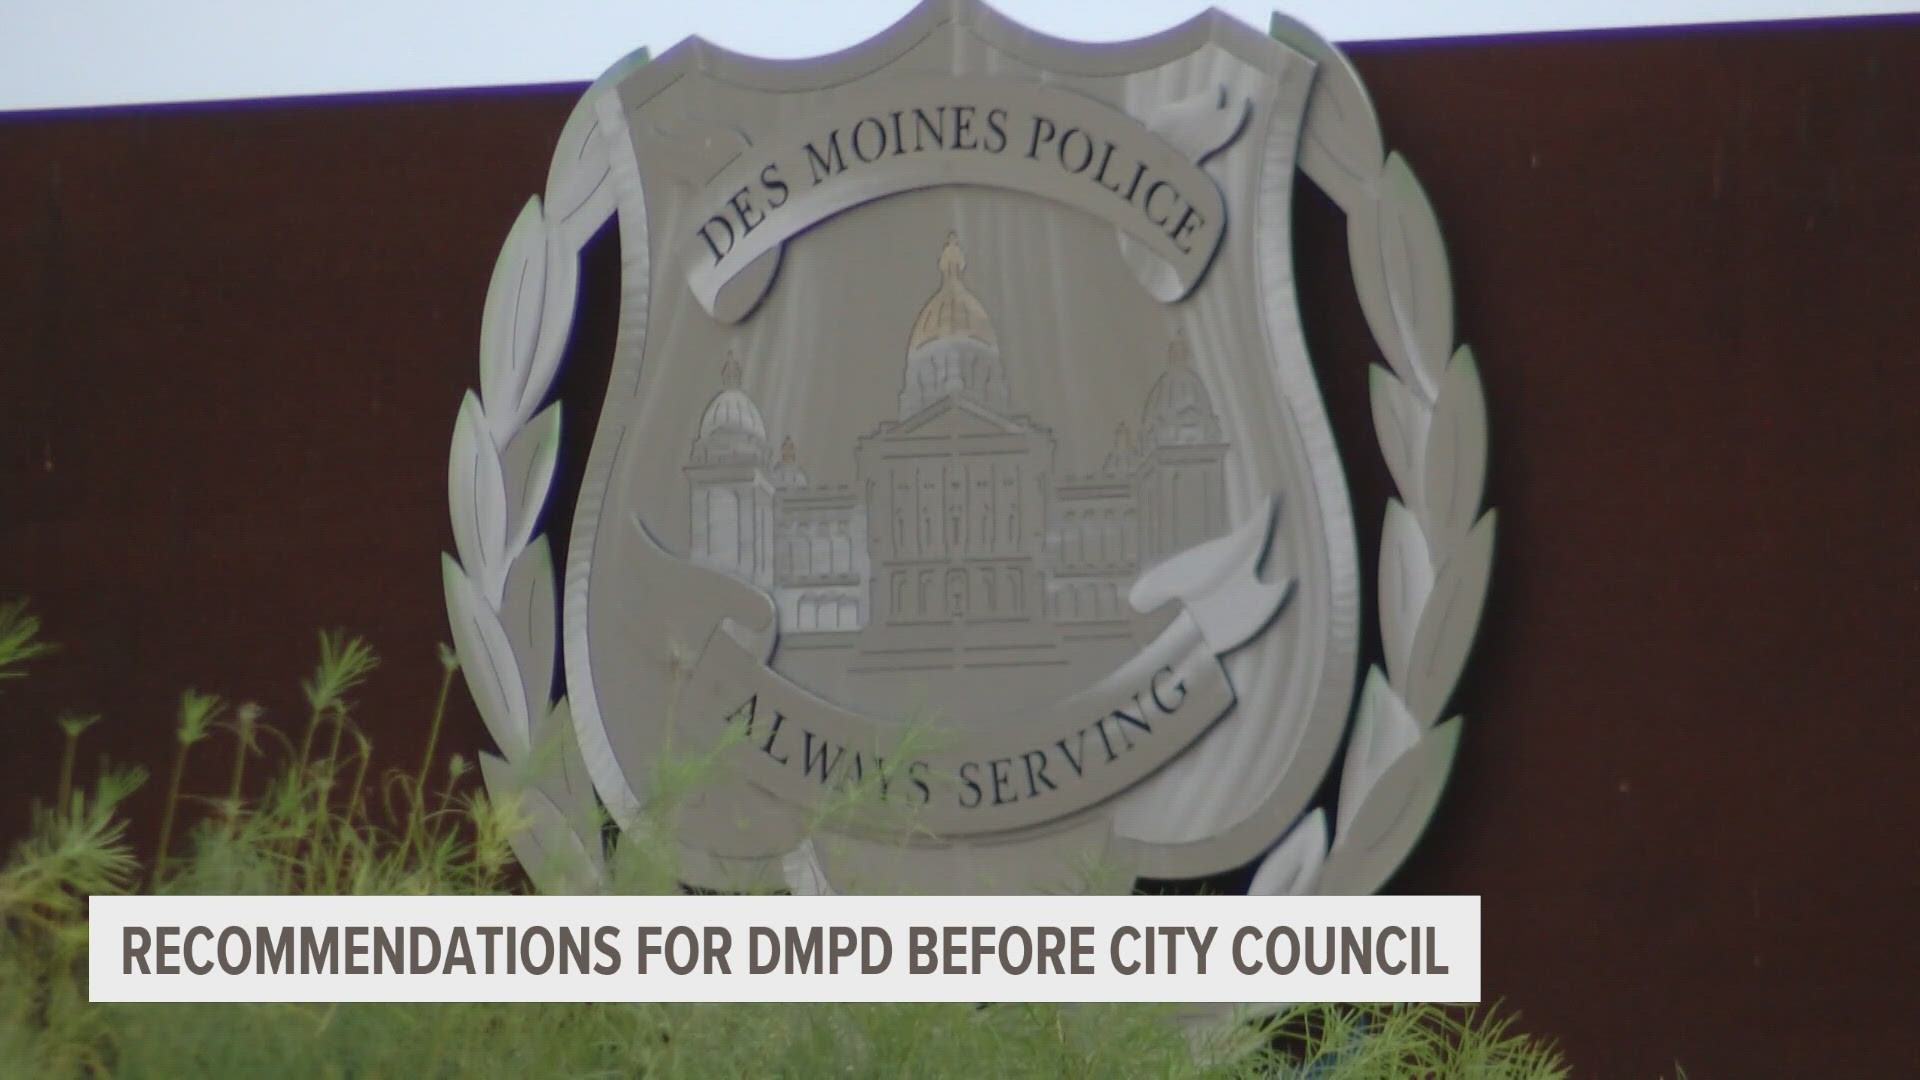 The report from 21CP Solutions proposes a community-review board for DMPD, something mayor-elect Connie Boesen has fought for throughout her campaign.